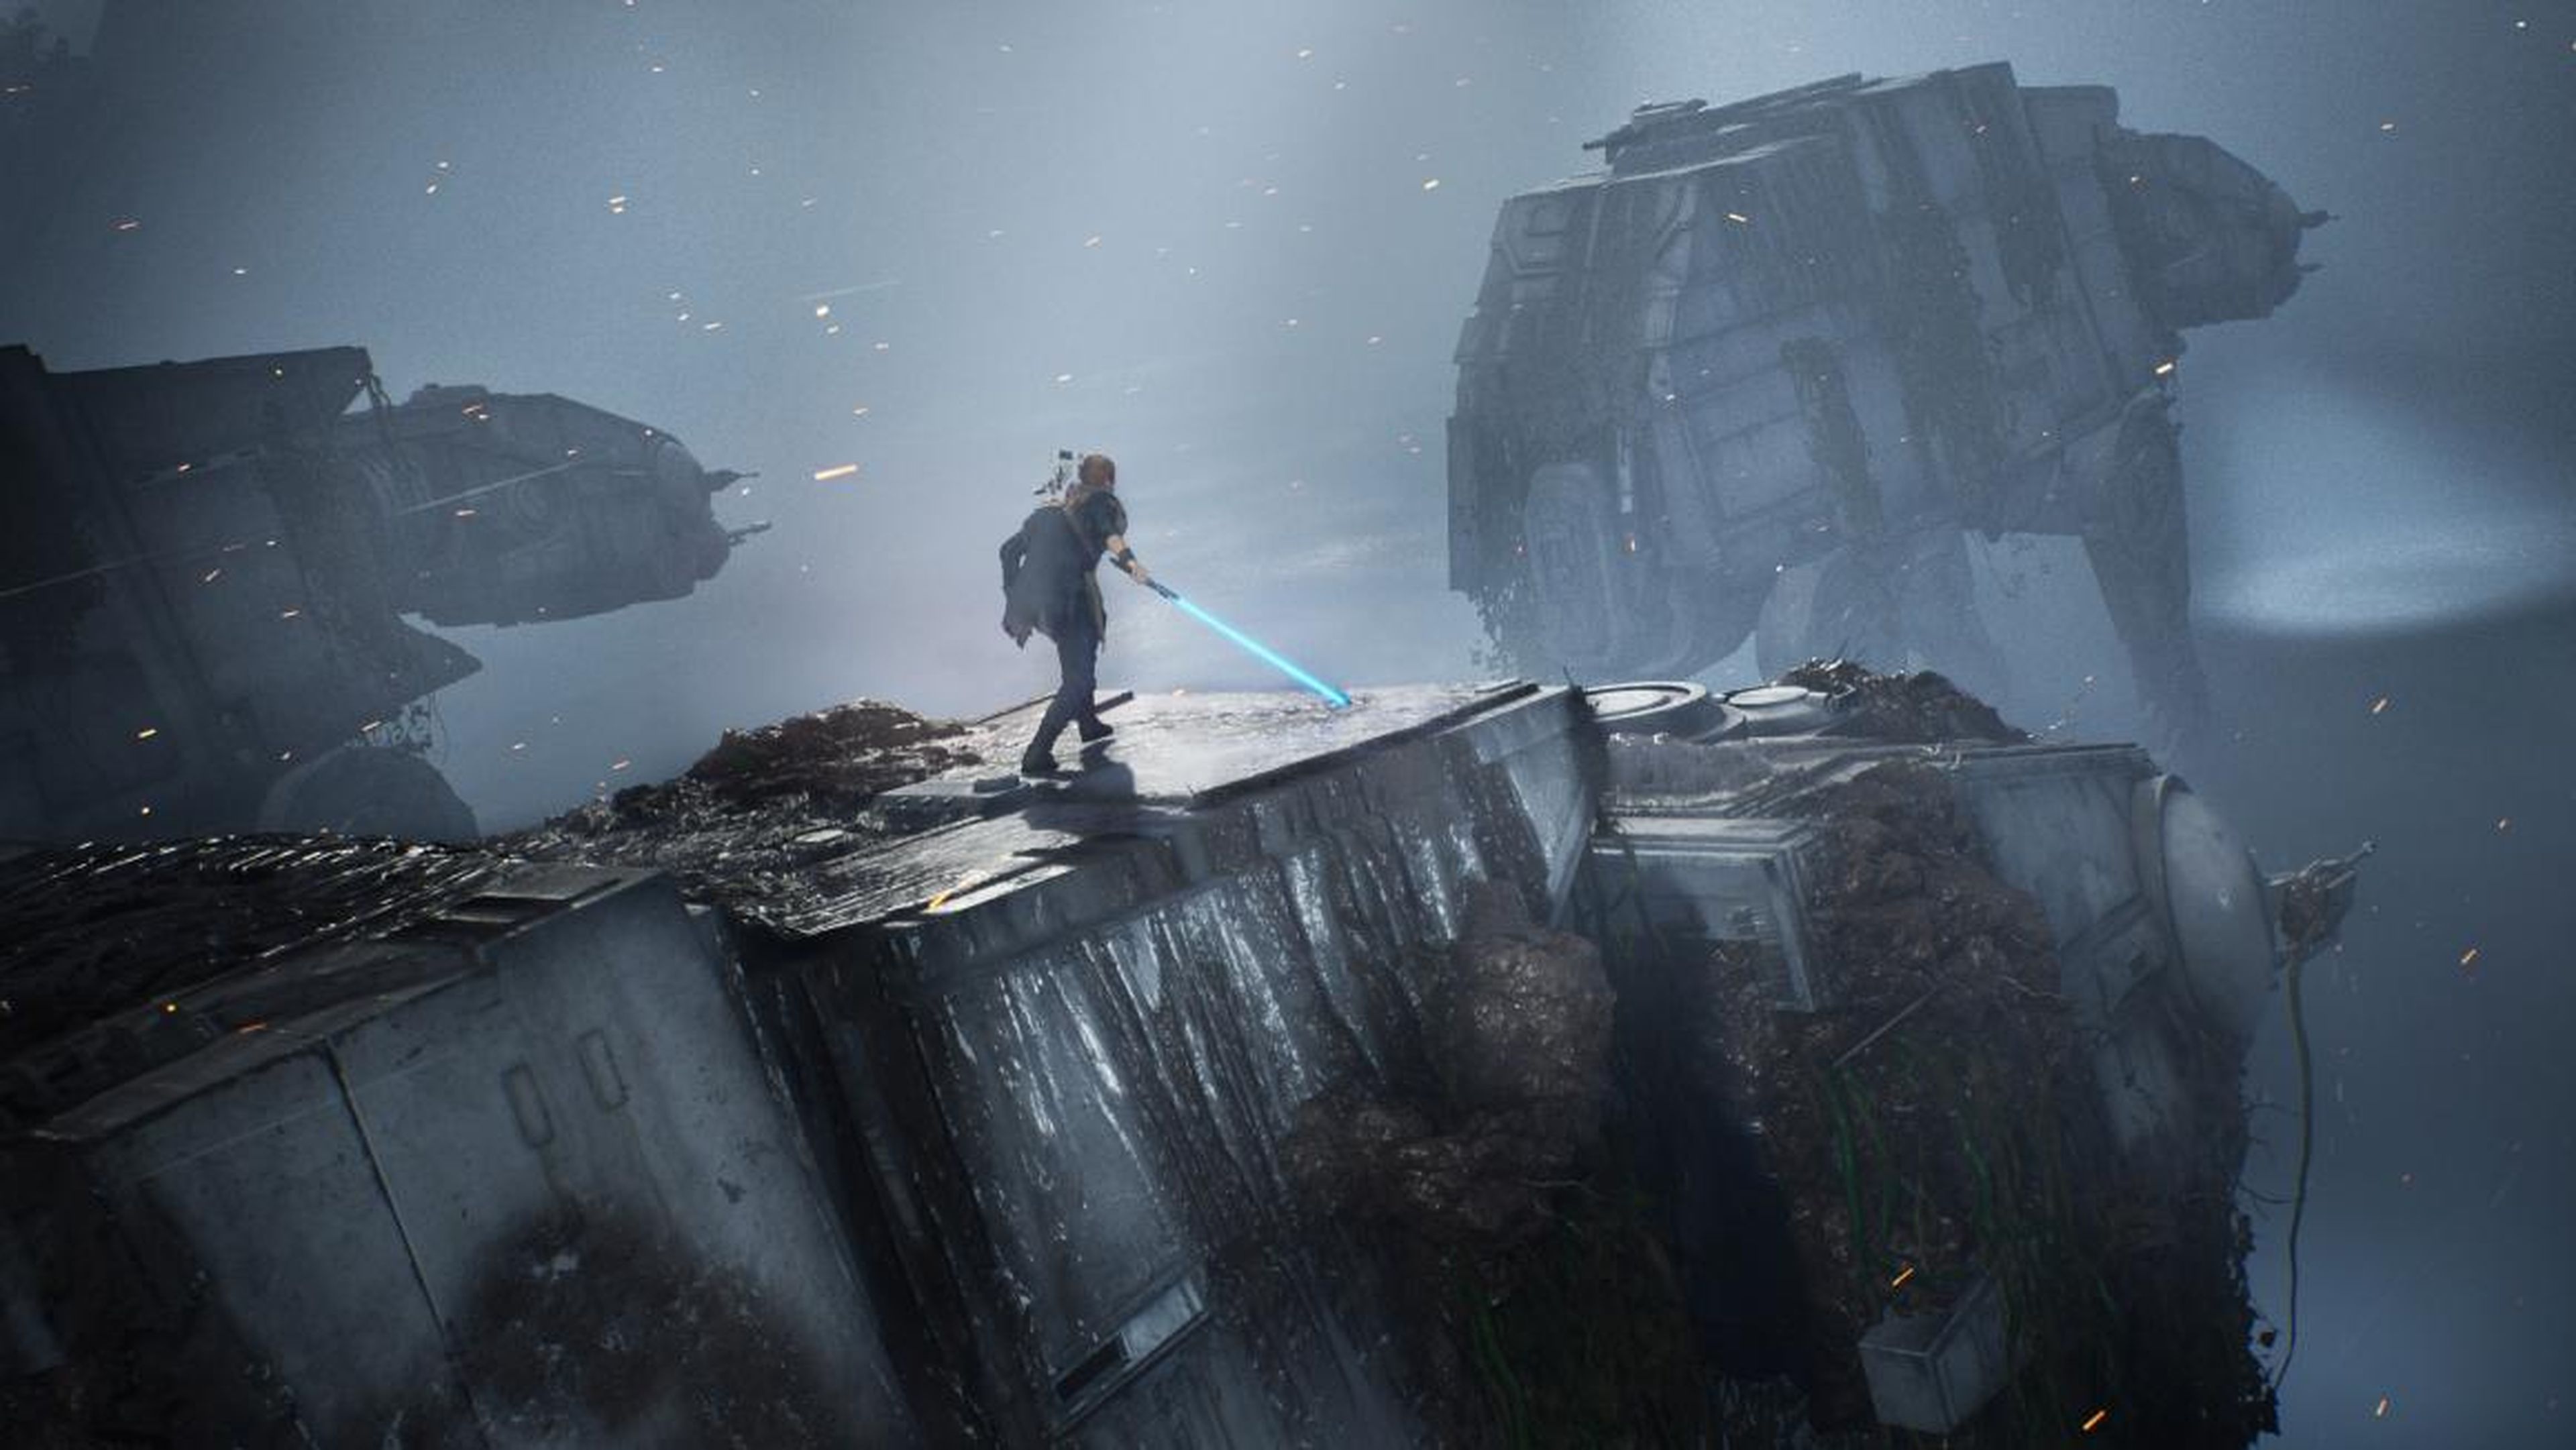 4. The demo started with Cal outright climbing an AT-AT, taking it over, and wrecking everything in his path.